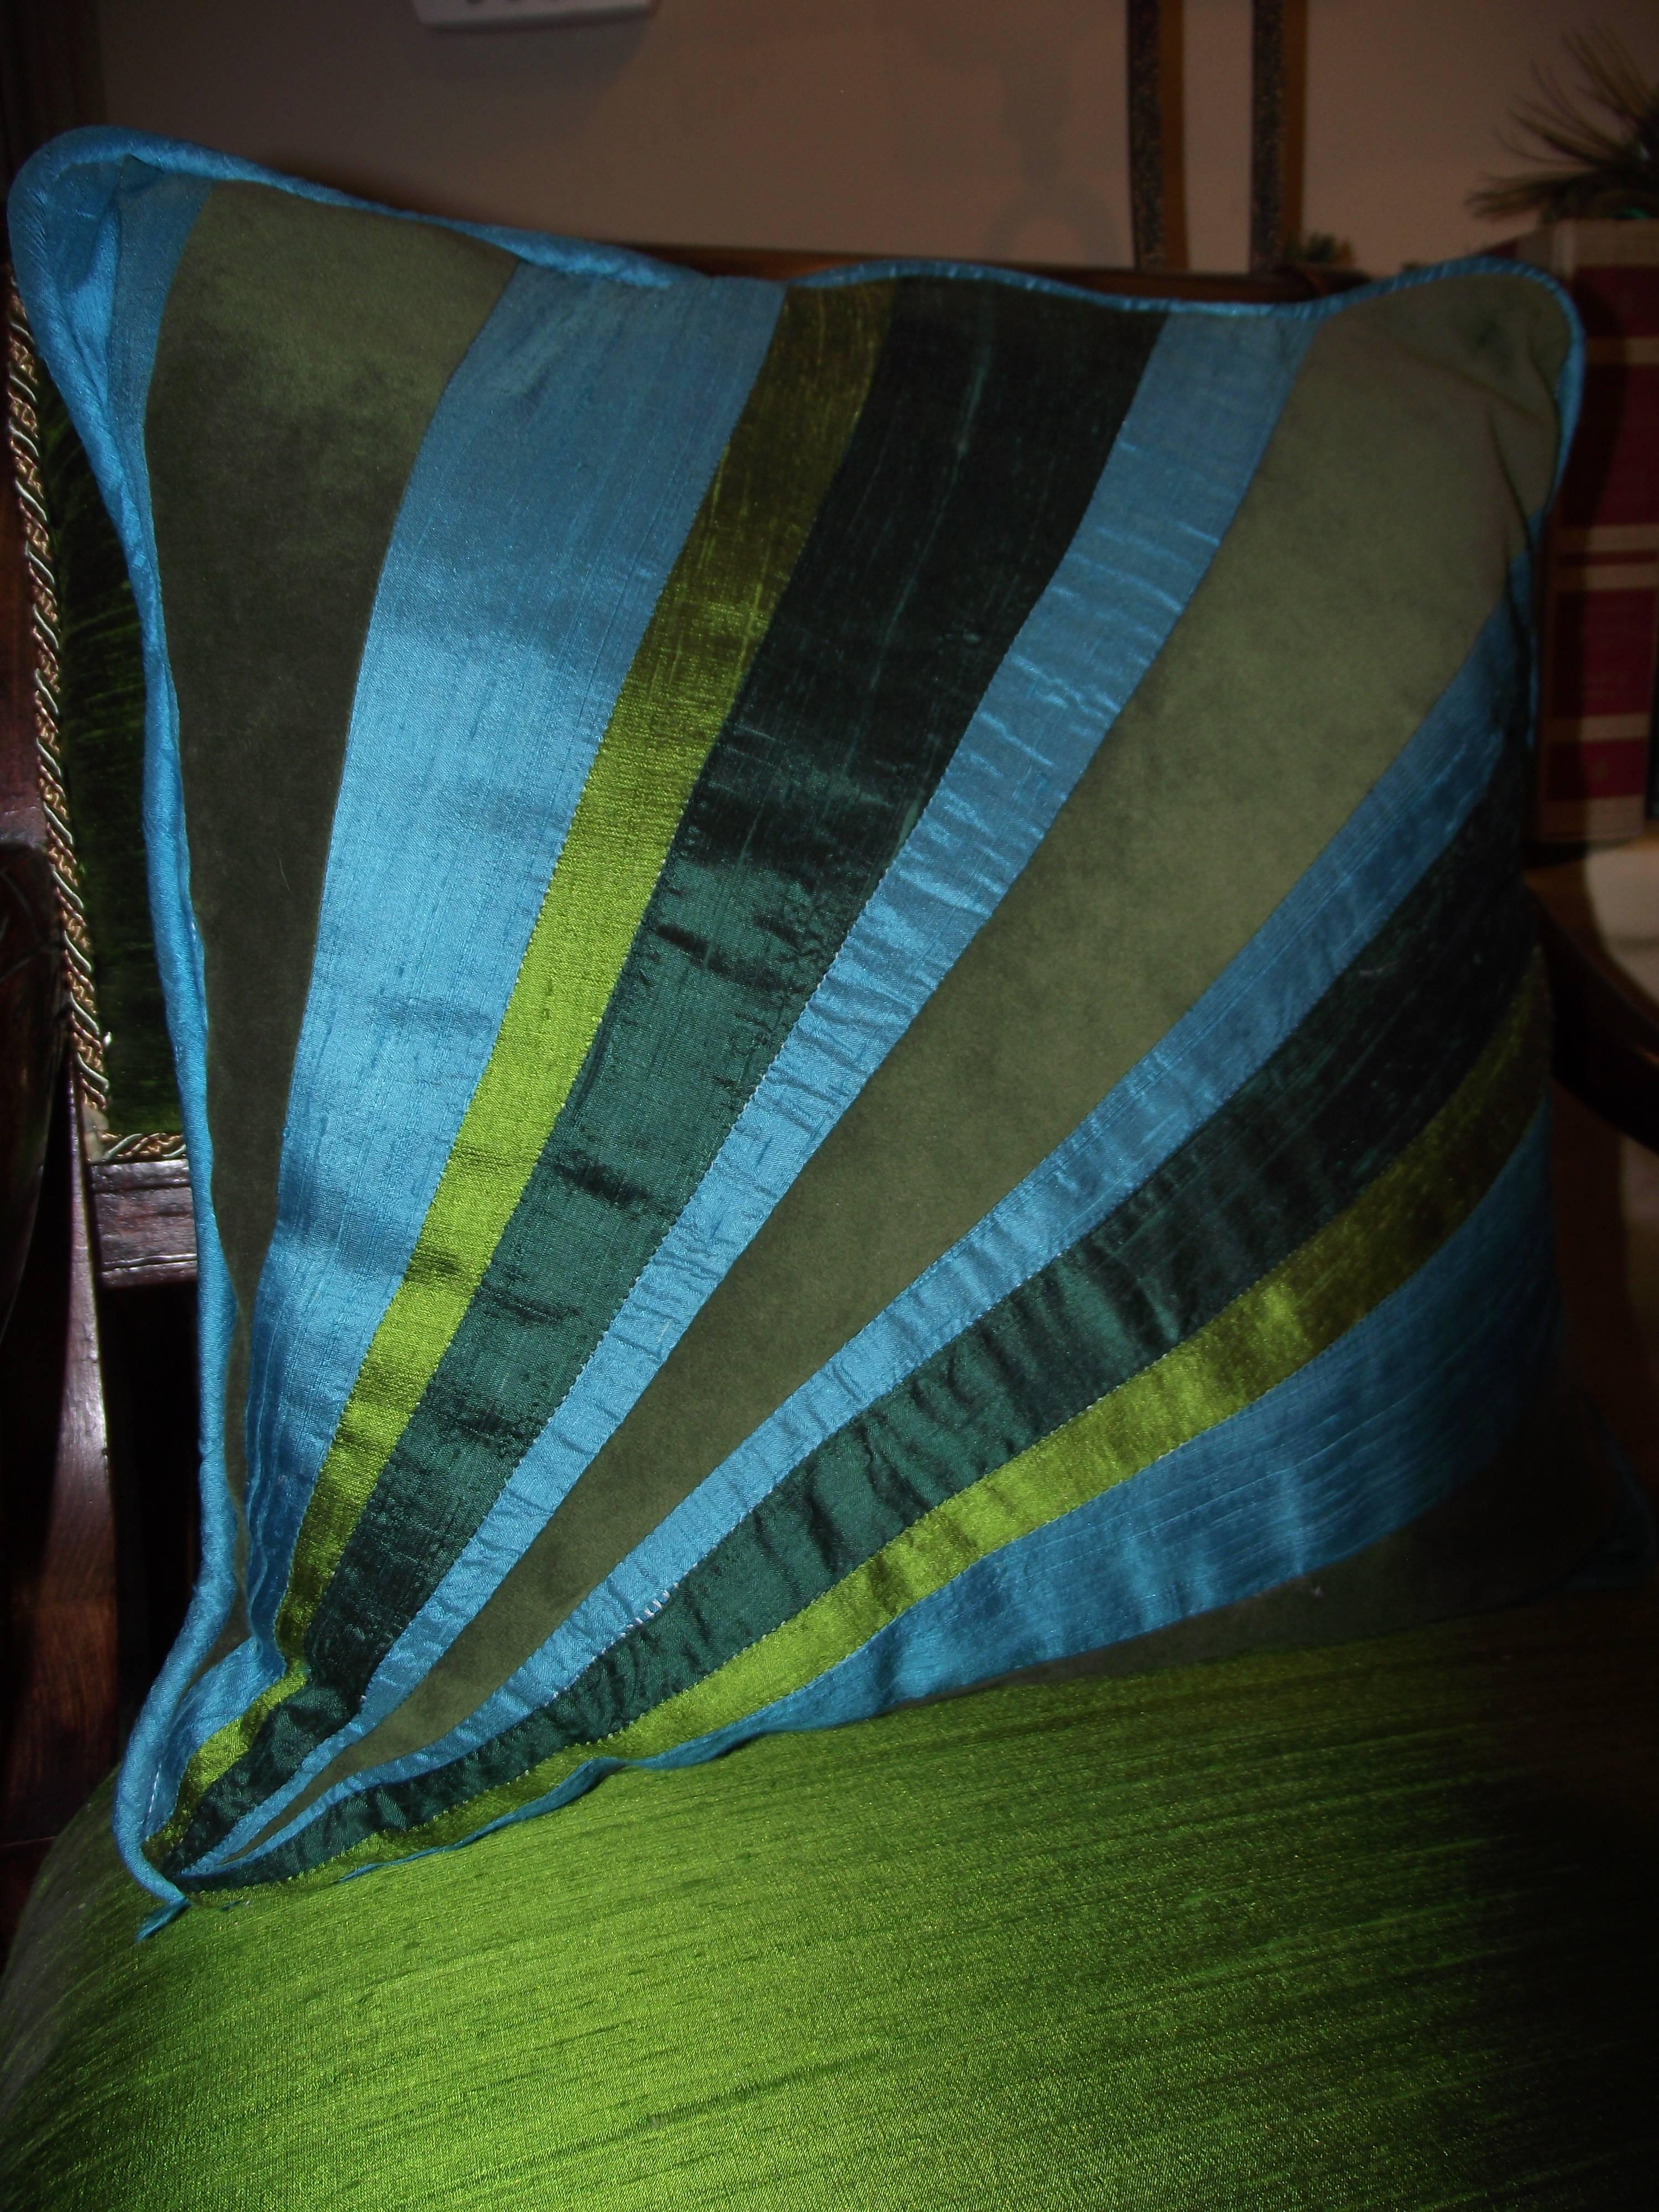 This luxurious throw pillow is a one of a kind design from GANTT Design Studio. The colors are taken directly from a peacock feather. It is a delightful combination of texture featuring velvet and shantung silks. The pillow form is made of a medium